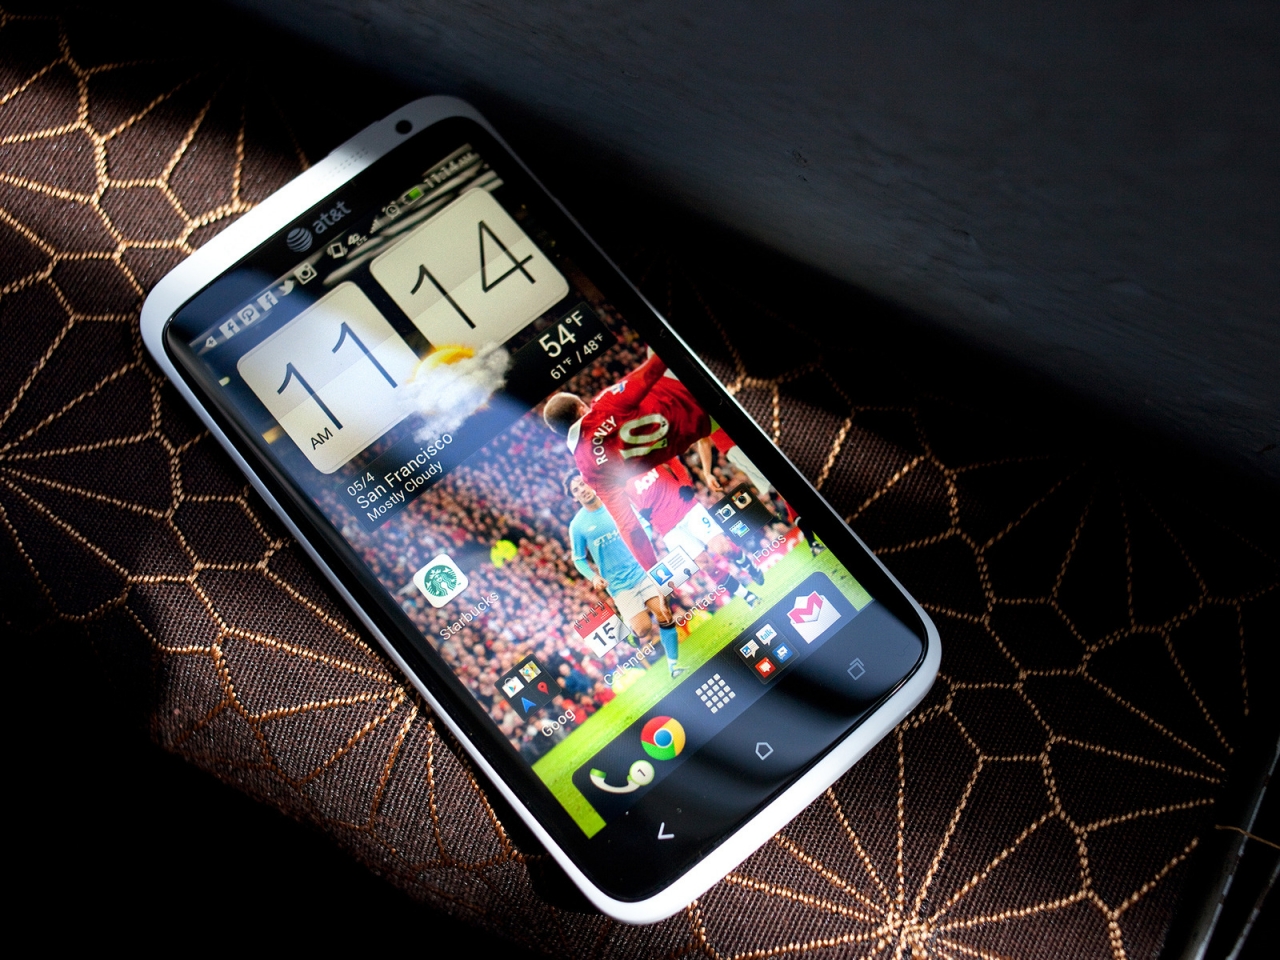 HTC One for 1280 x 960 resolution